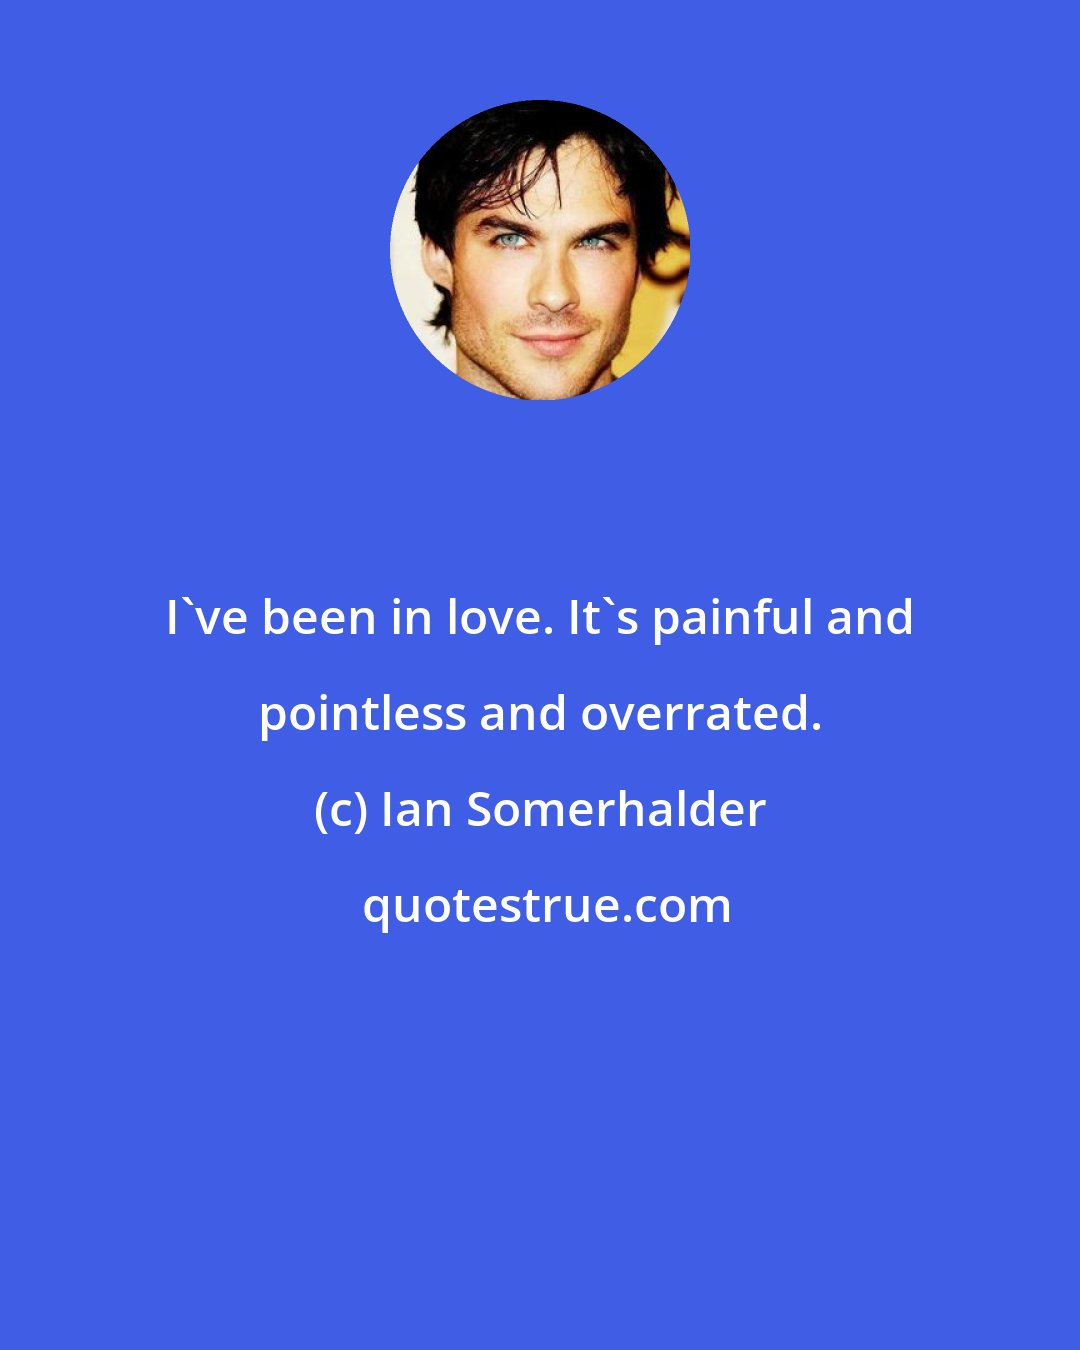 Ian Somerhalder: I've been in love. It's painful and pointless and overrated.